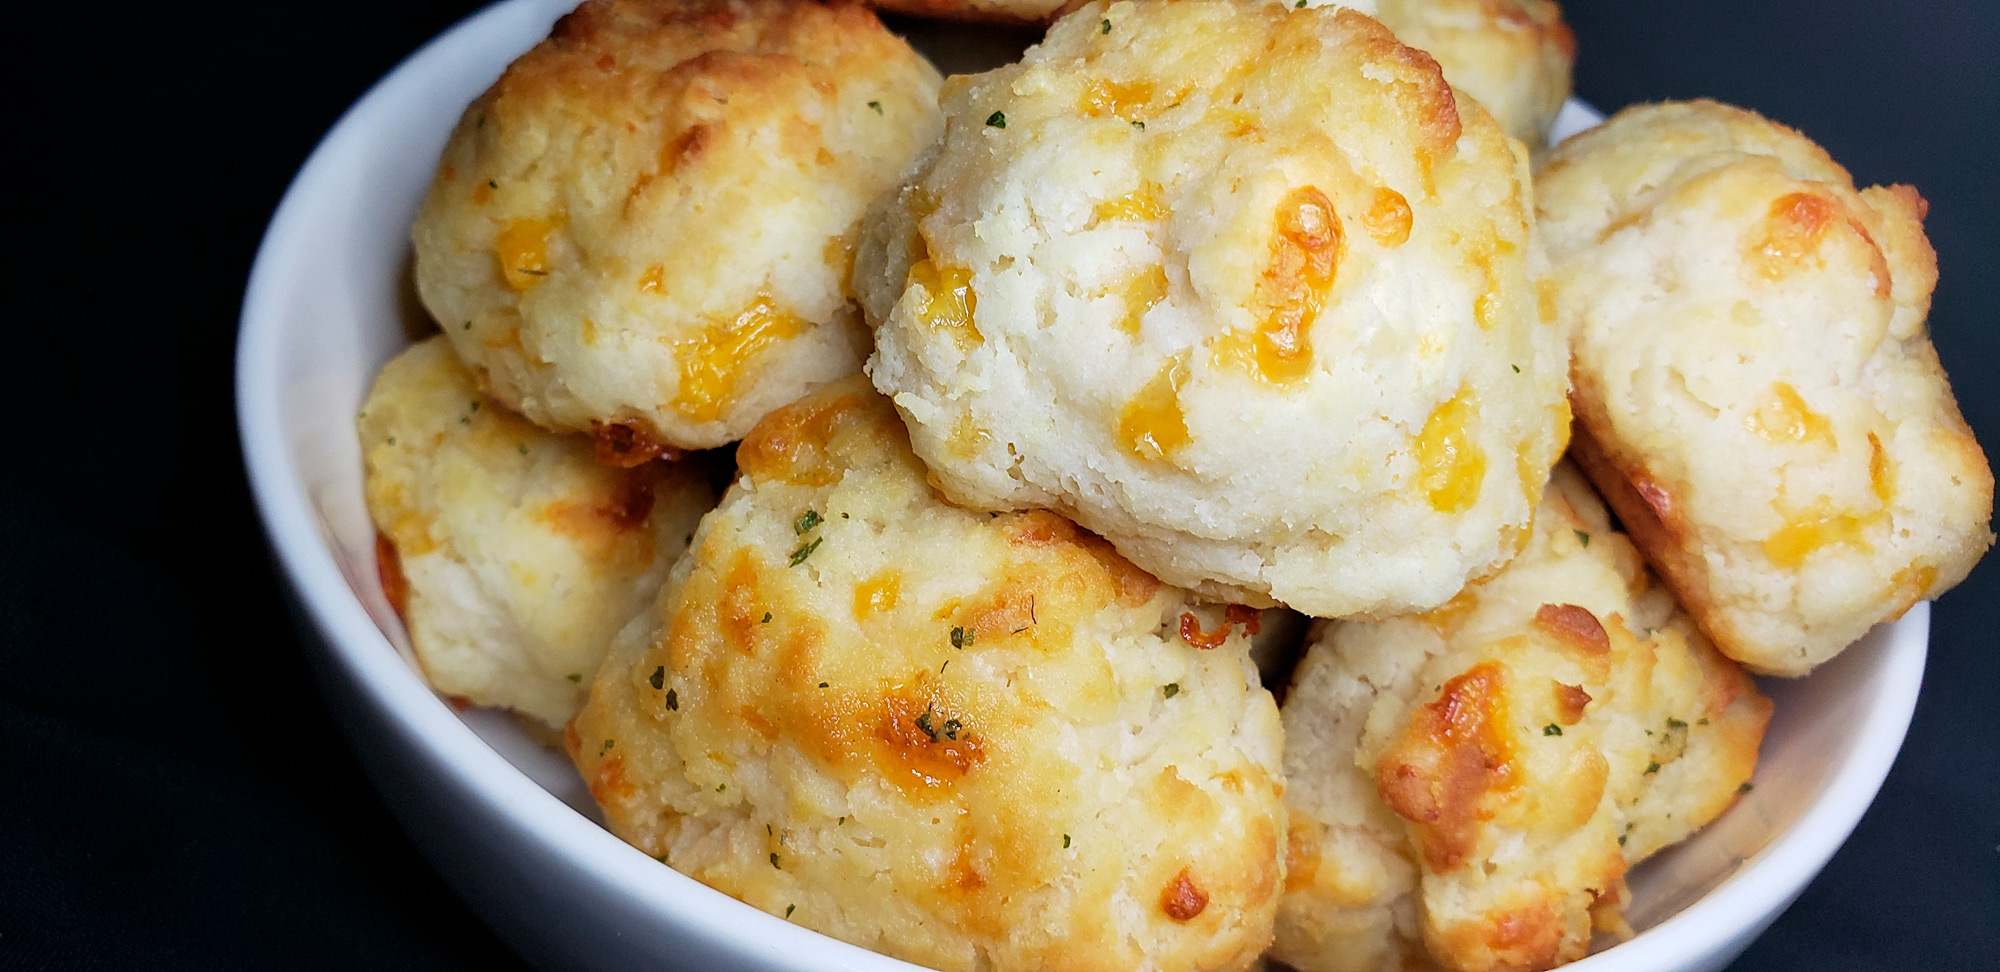 Featured image for “Basil and Cheddar Biscuits”